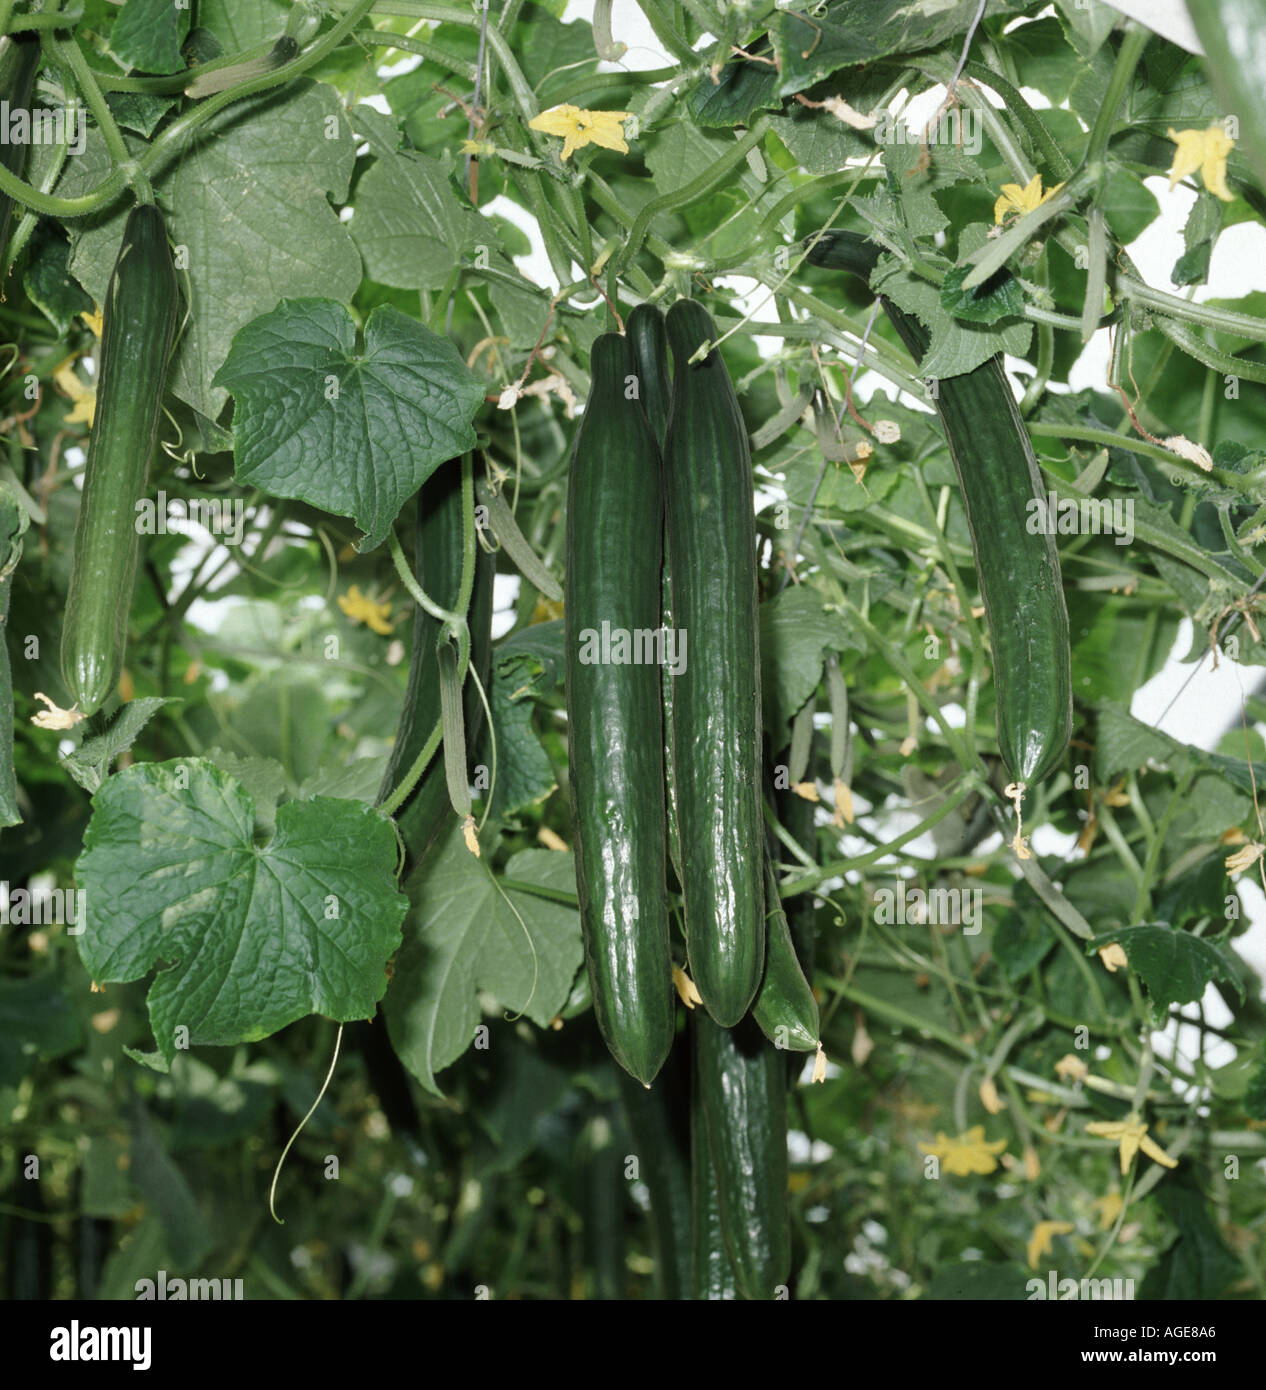 Ripe cucumbers growing in glasshouse grown by hydroponic feeding system Stock Photo